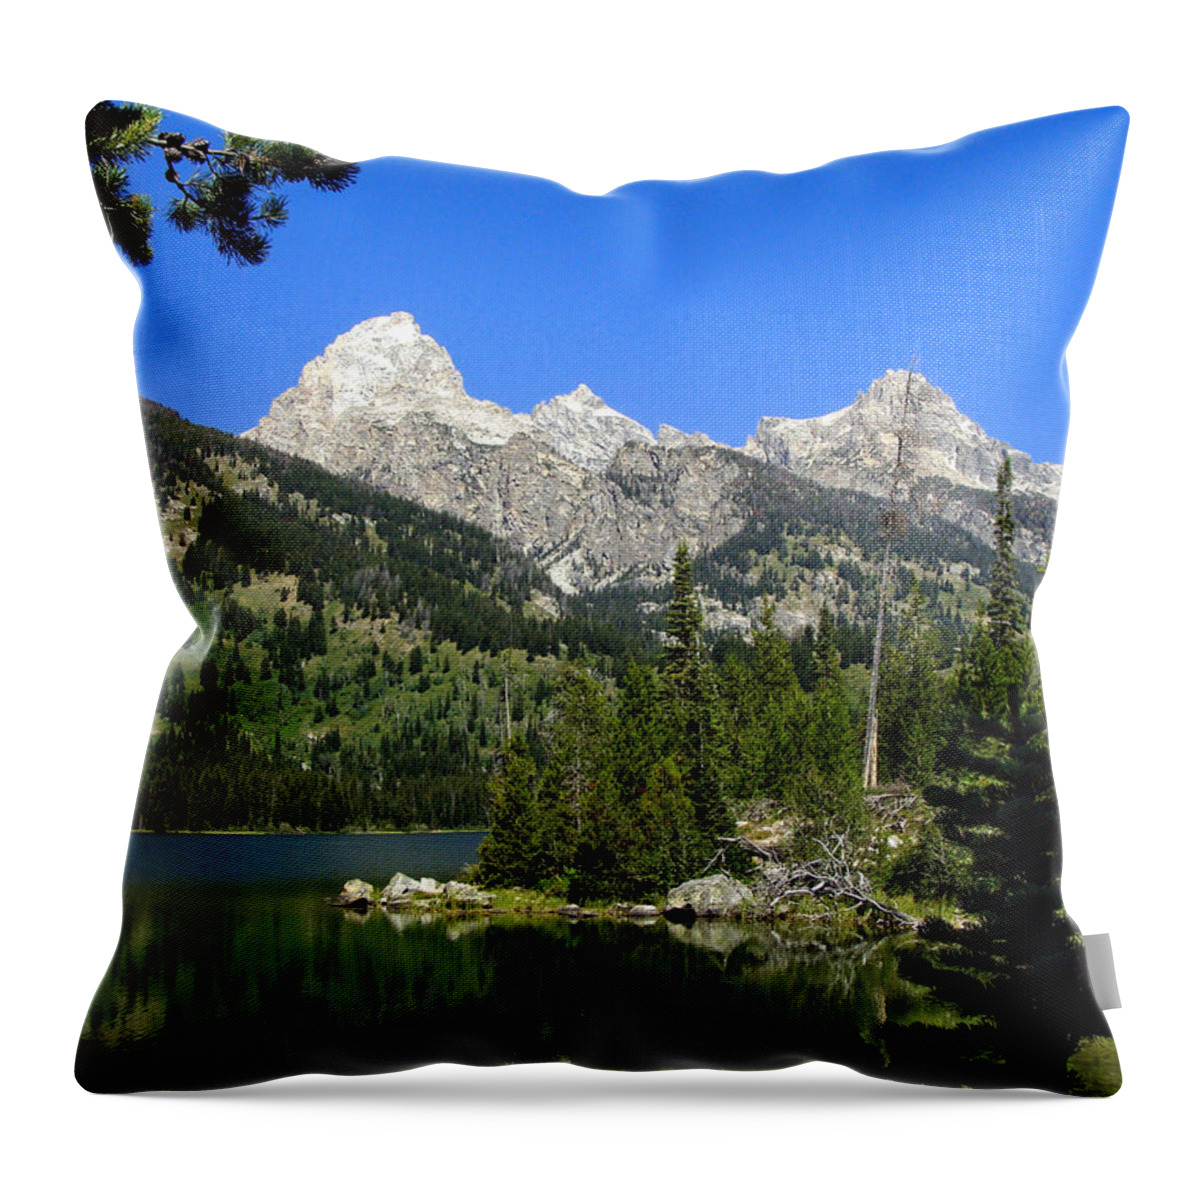 Taggart Lake Throw Pillow featuring the photograph Taggart Lake by Stacy Abbott